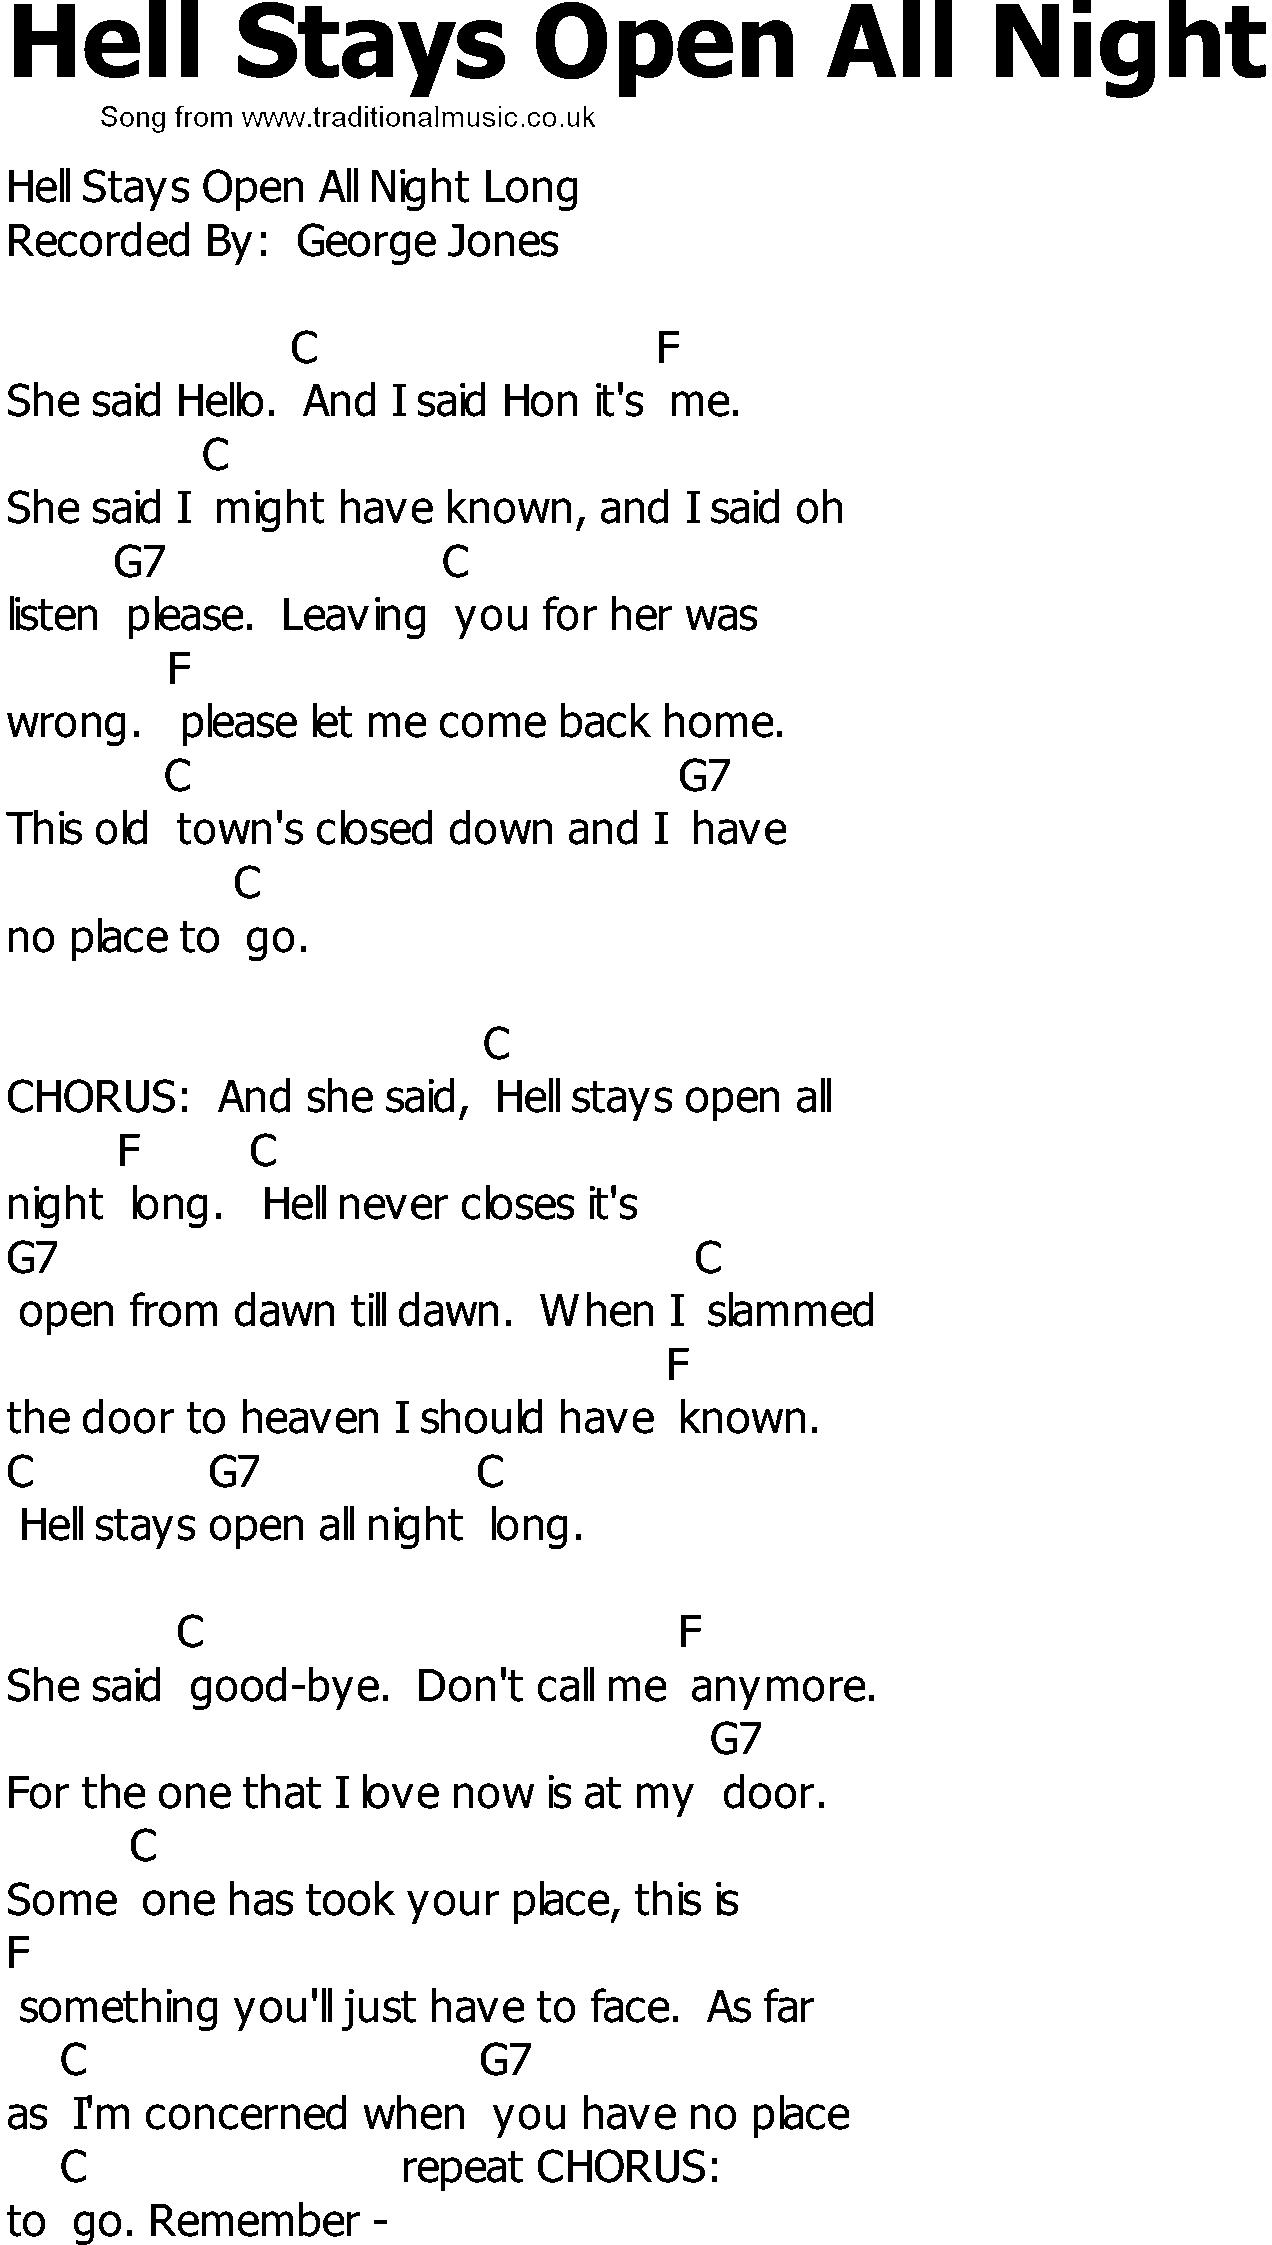 Old Country song lyrics with chords - Hell Stays Open All Night